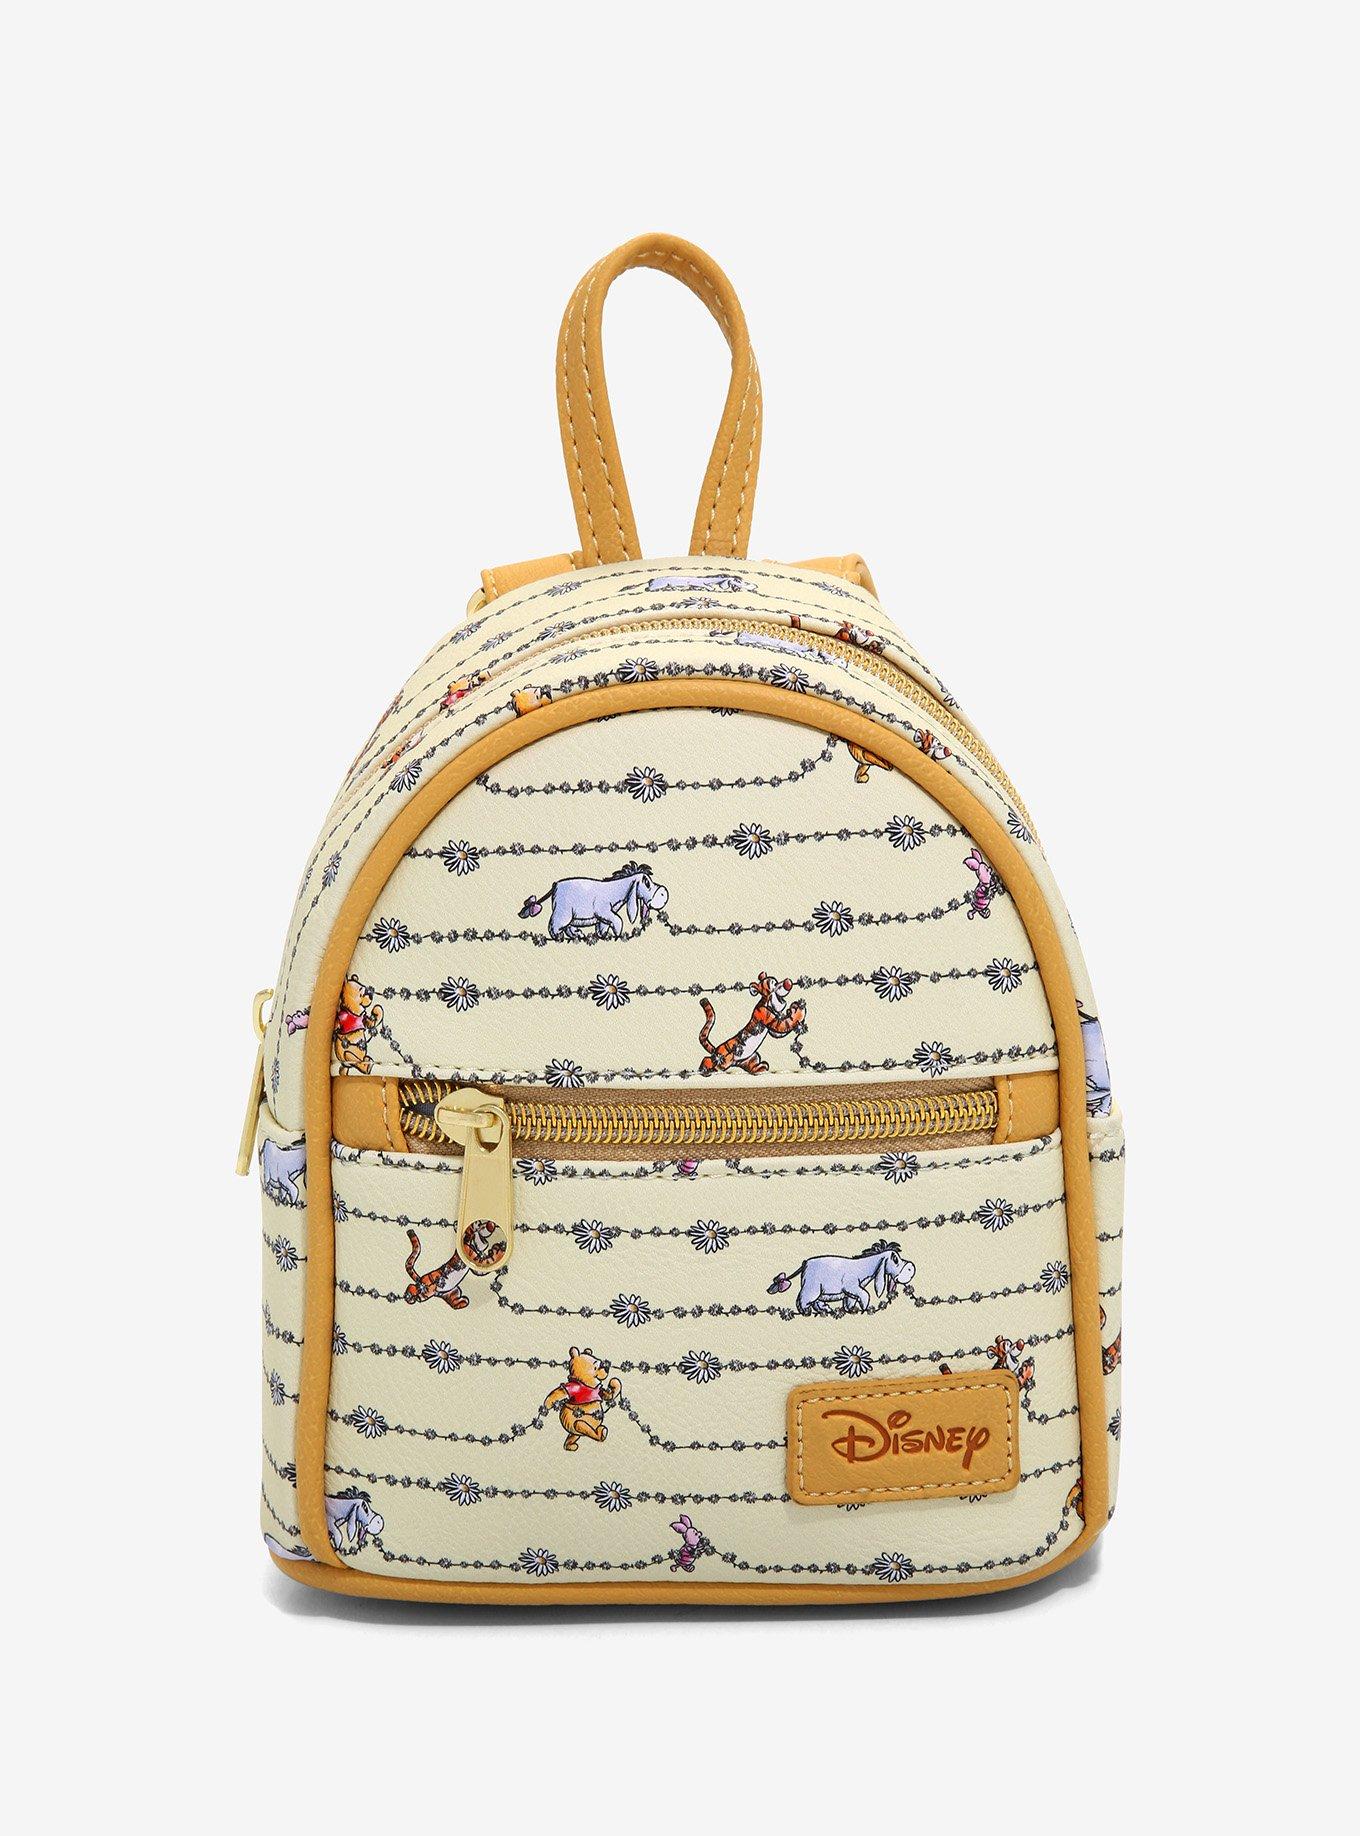 Disney Winnie The Pooh Daisy Chains Micro Backpack, , hi-res